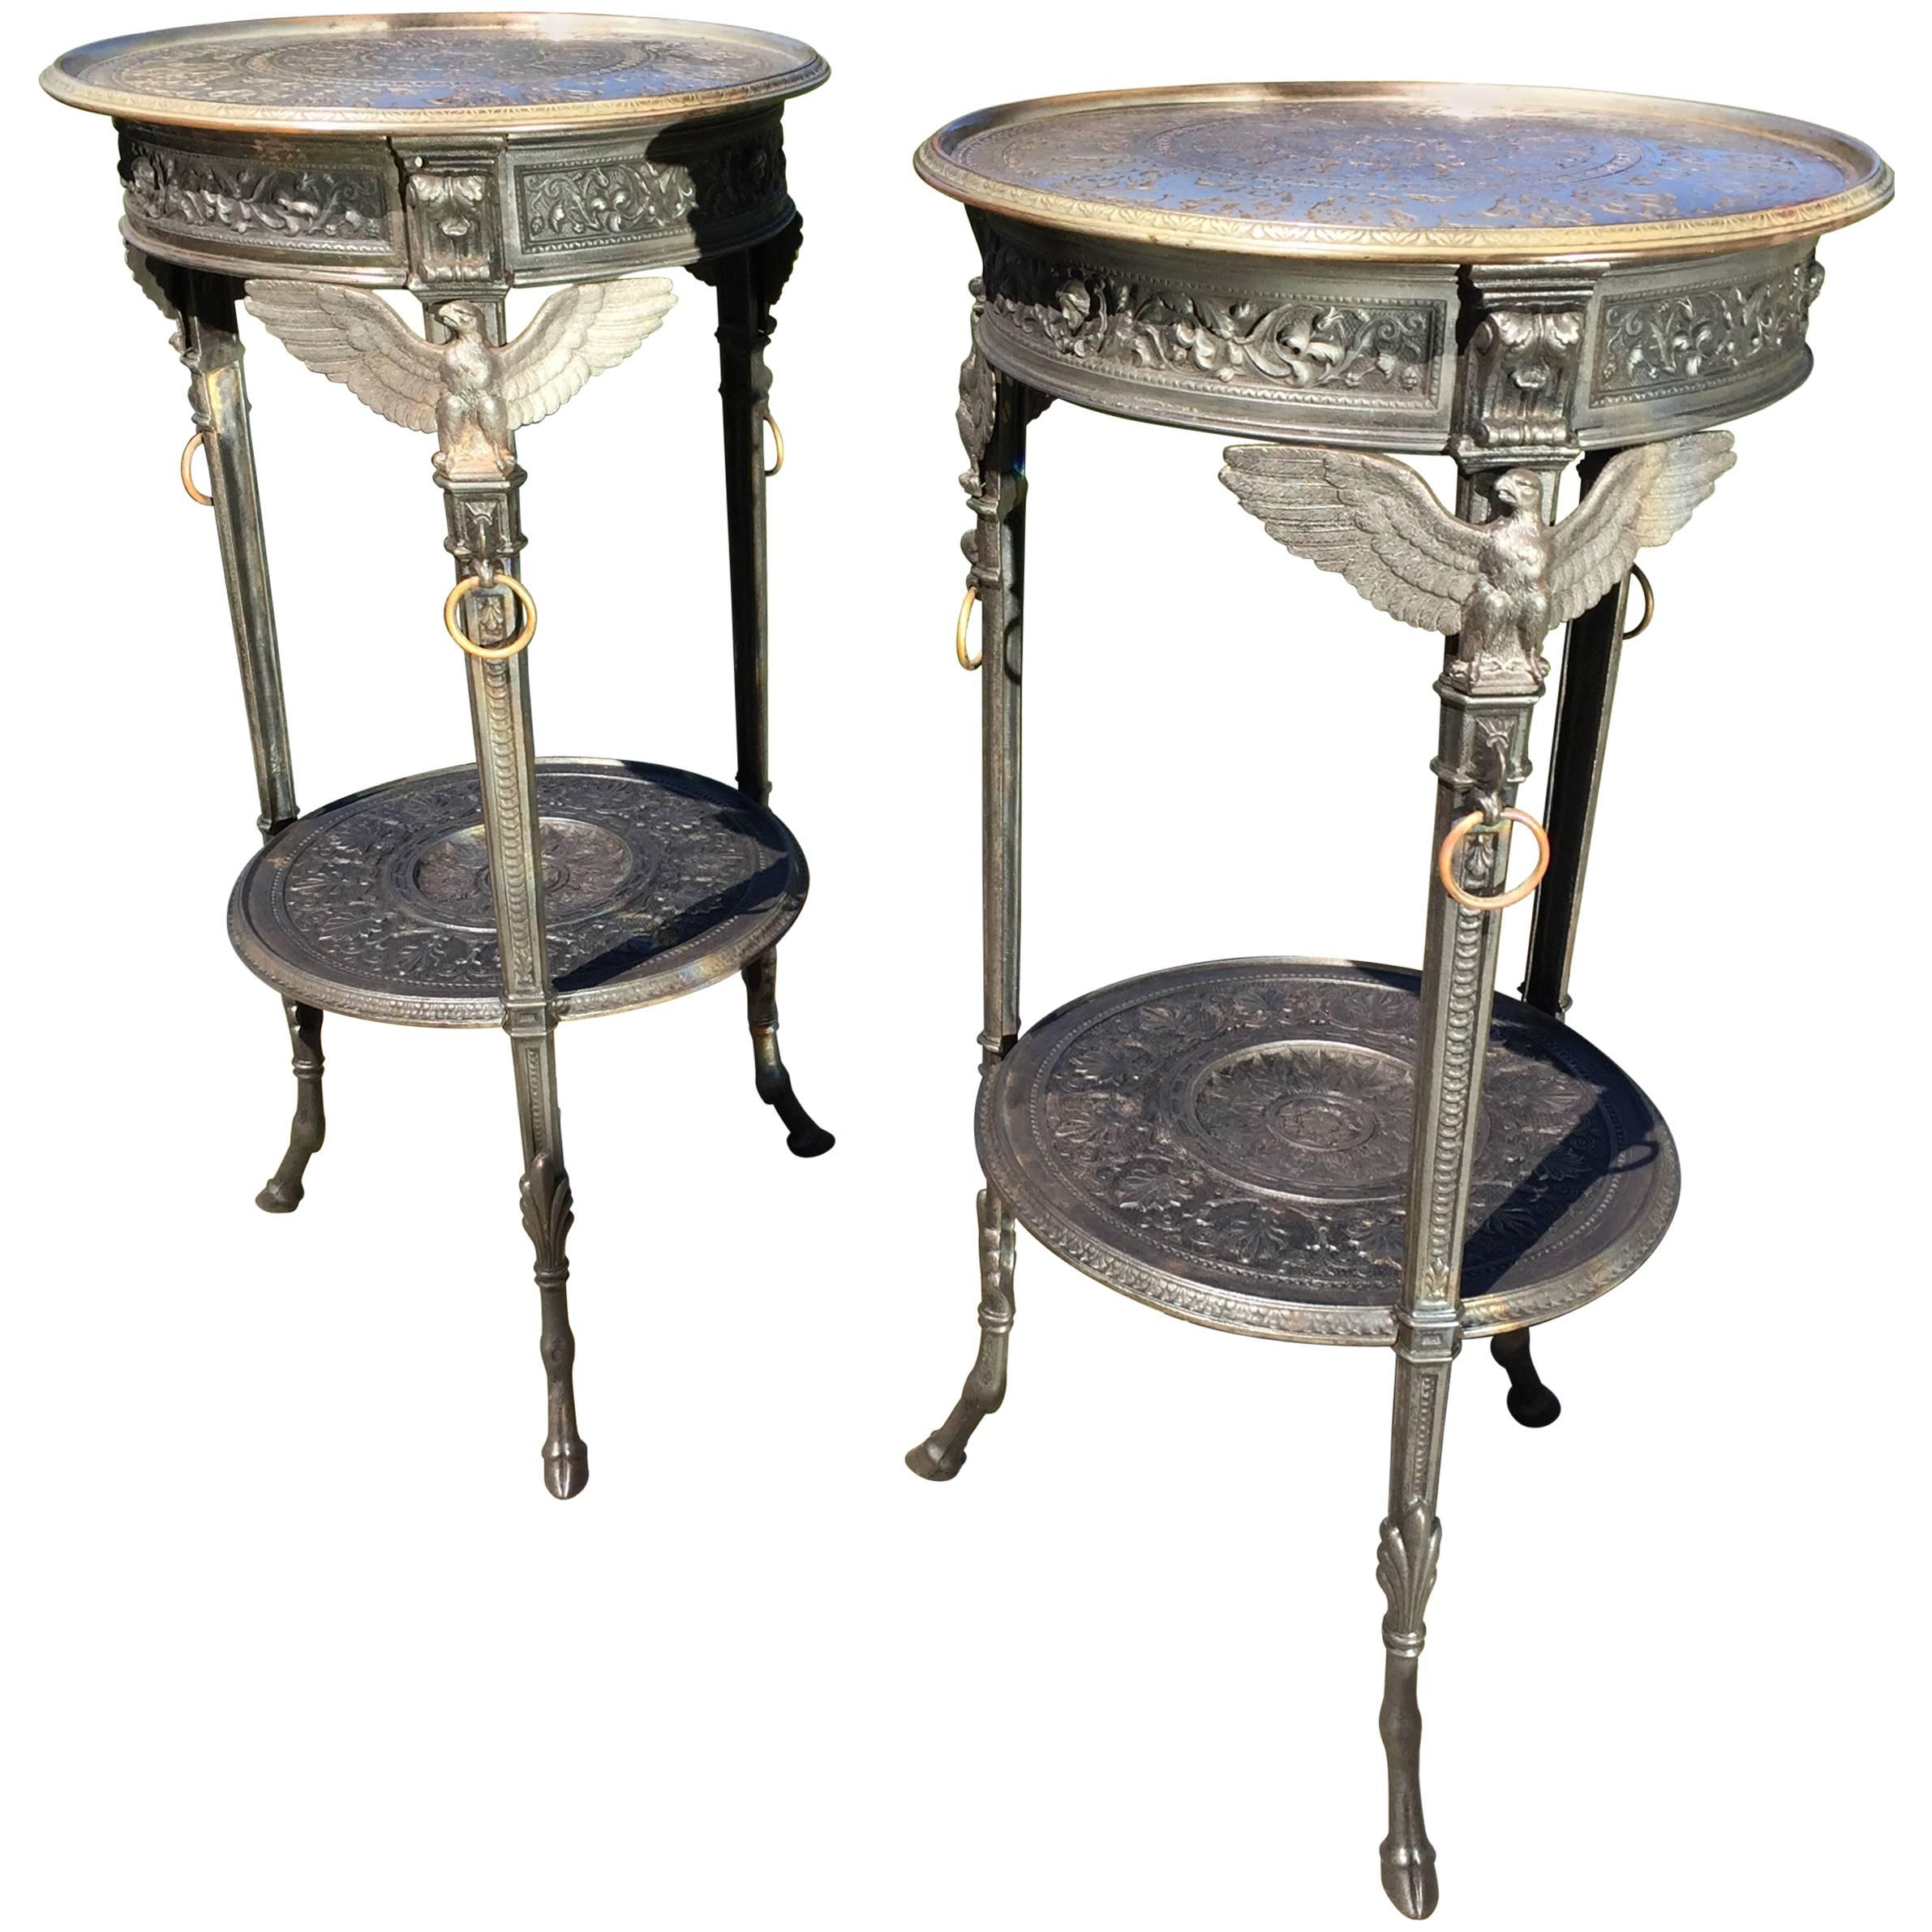 Exceptional Pair of French Neoclassical Polished Cast Iron Side Tables